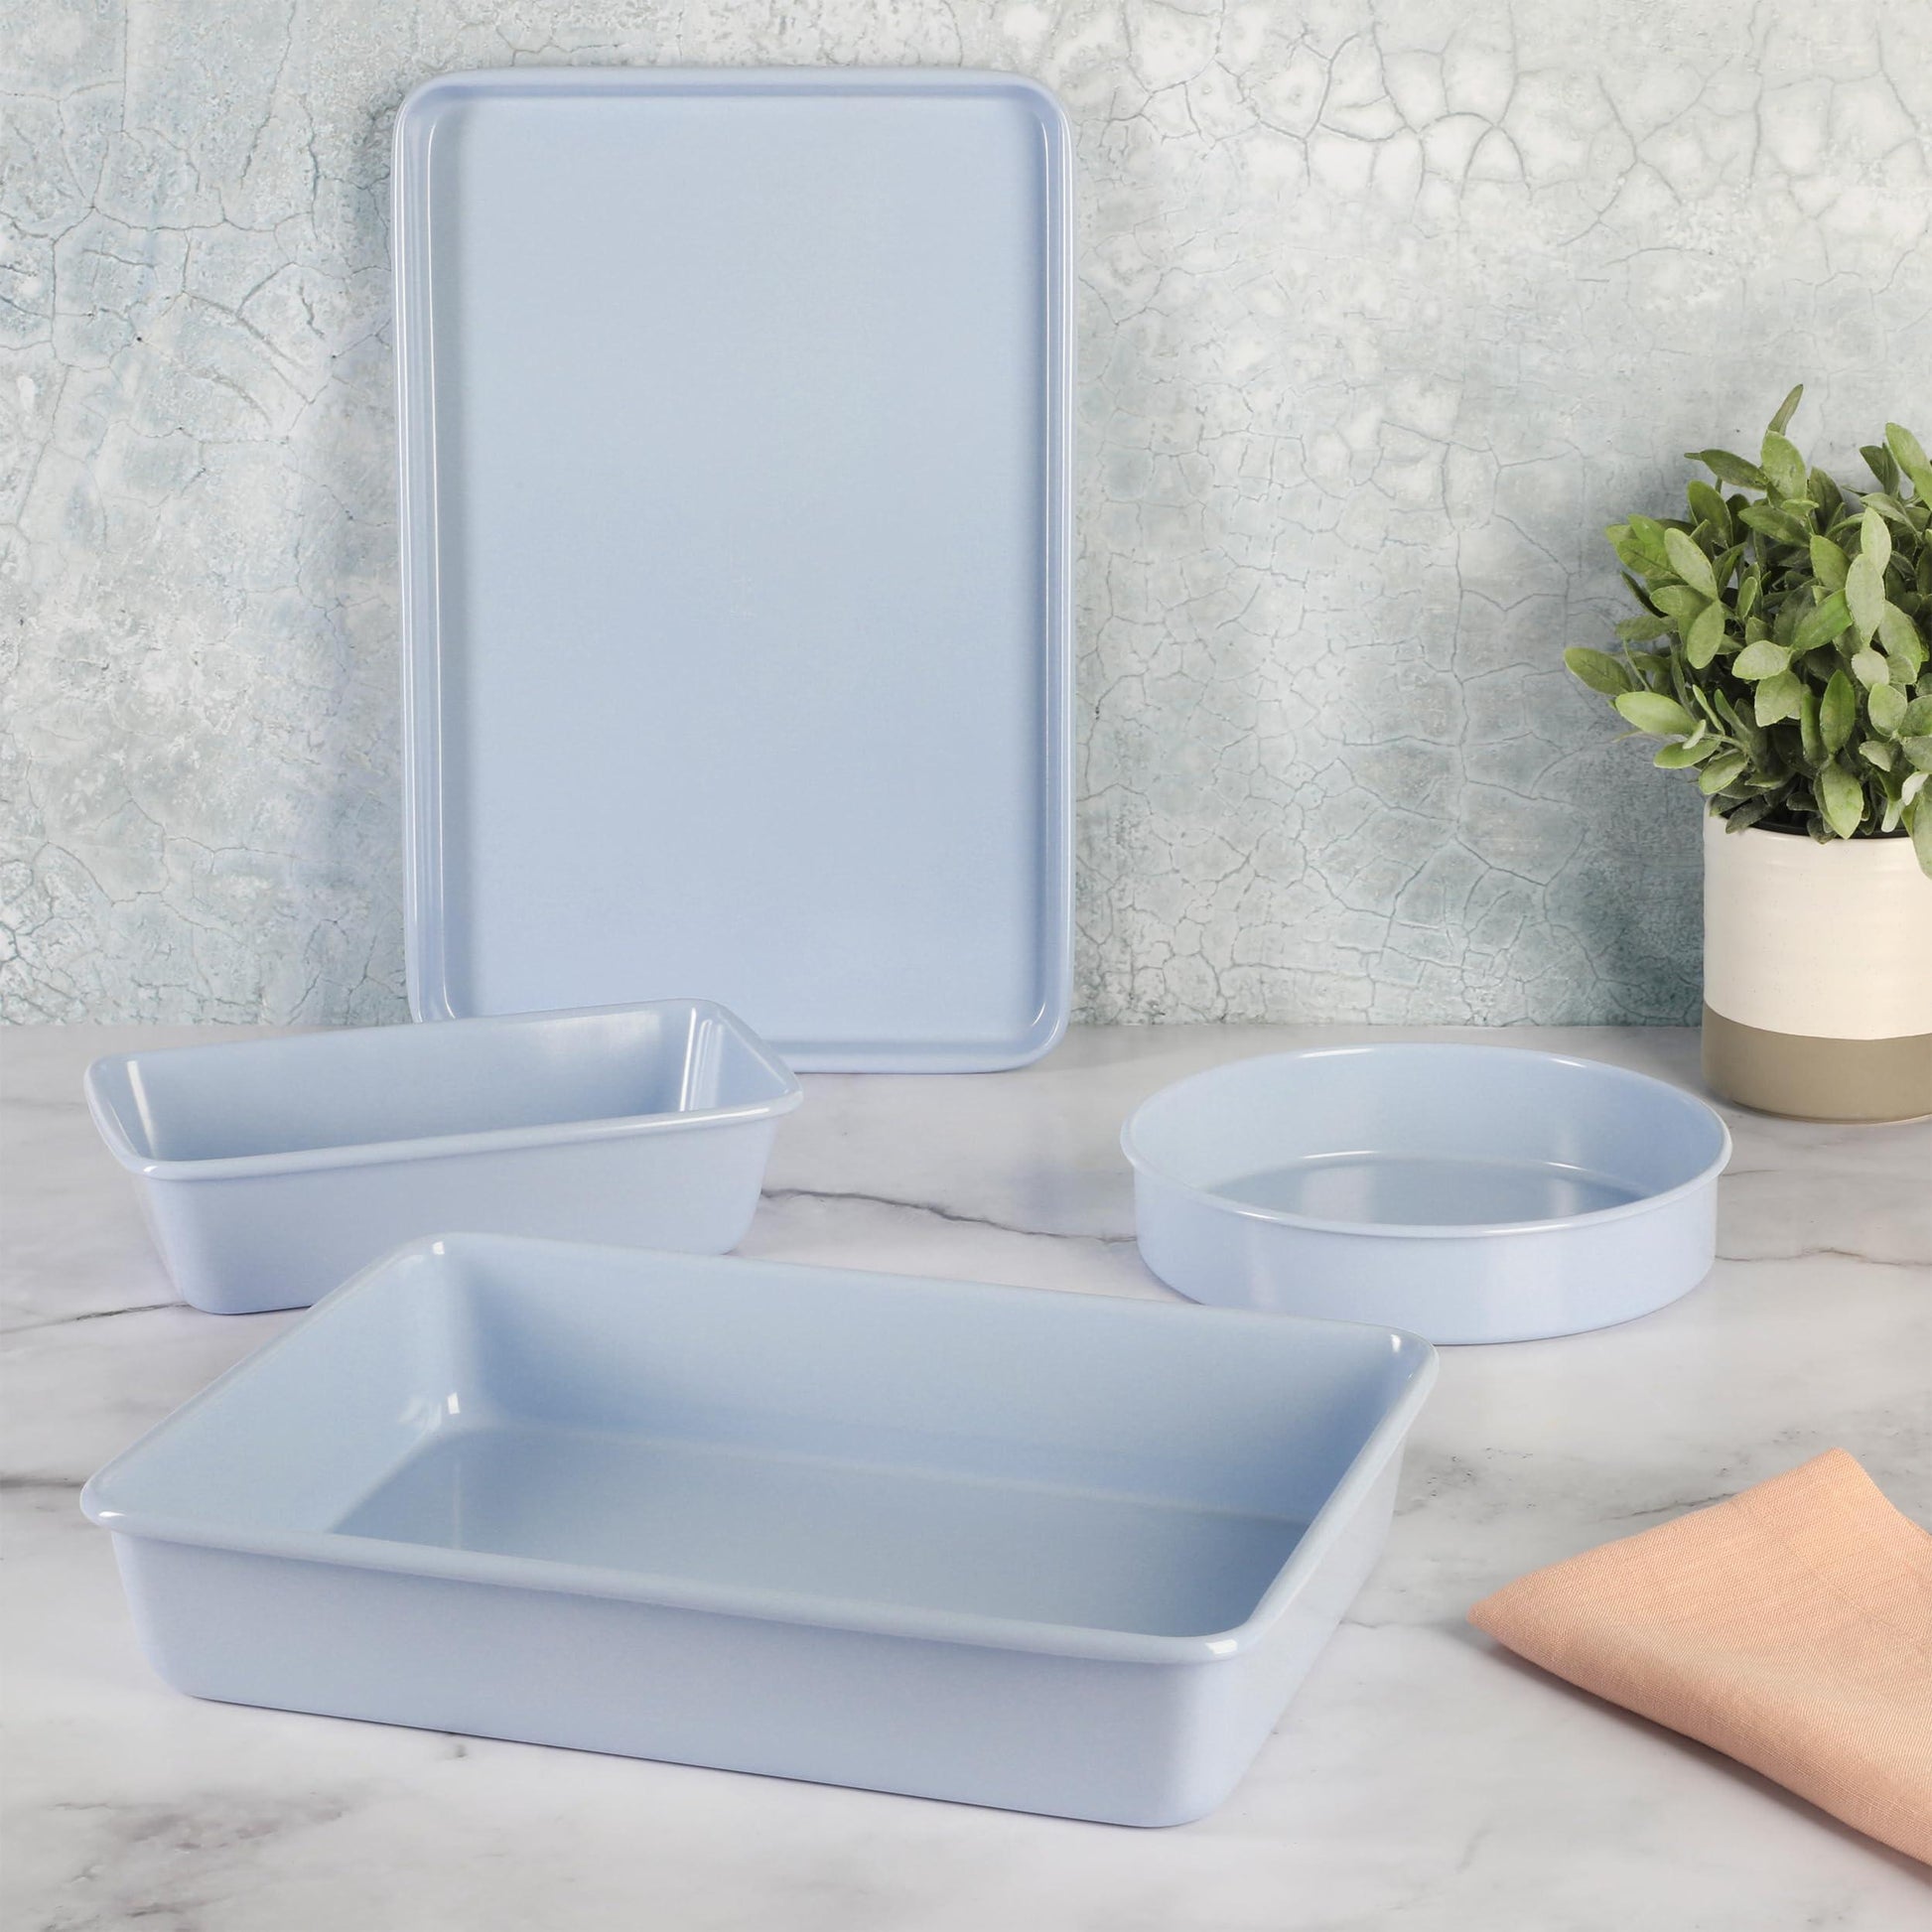 Martha Stewart Everyday 4 Piece Carbon Steel Colored Bakeware Set in Lavender - CookCave